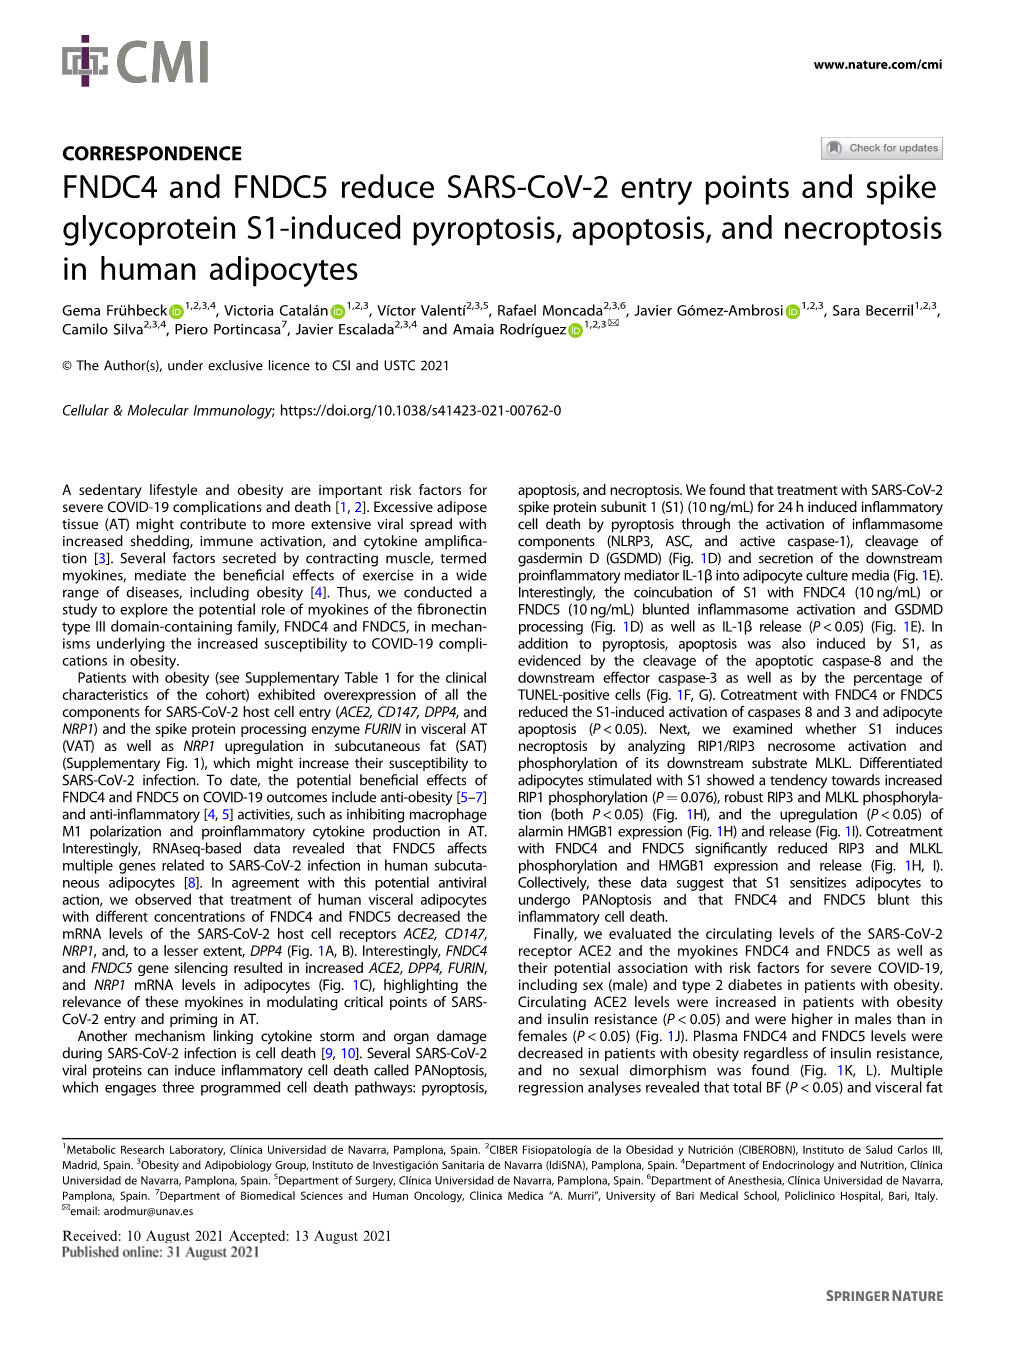 FNDC4 and FNDC5 Reduce SARS-Cov-2 Entry Points and Spike Glycoprotein S1-Induced Pyroptosis, Apoptosis, and Necroptosis in Human Adipocytes